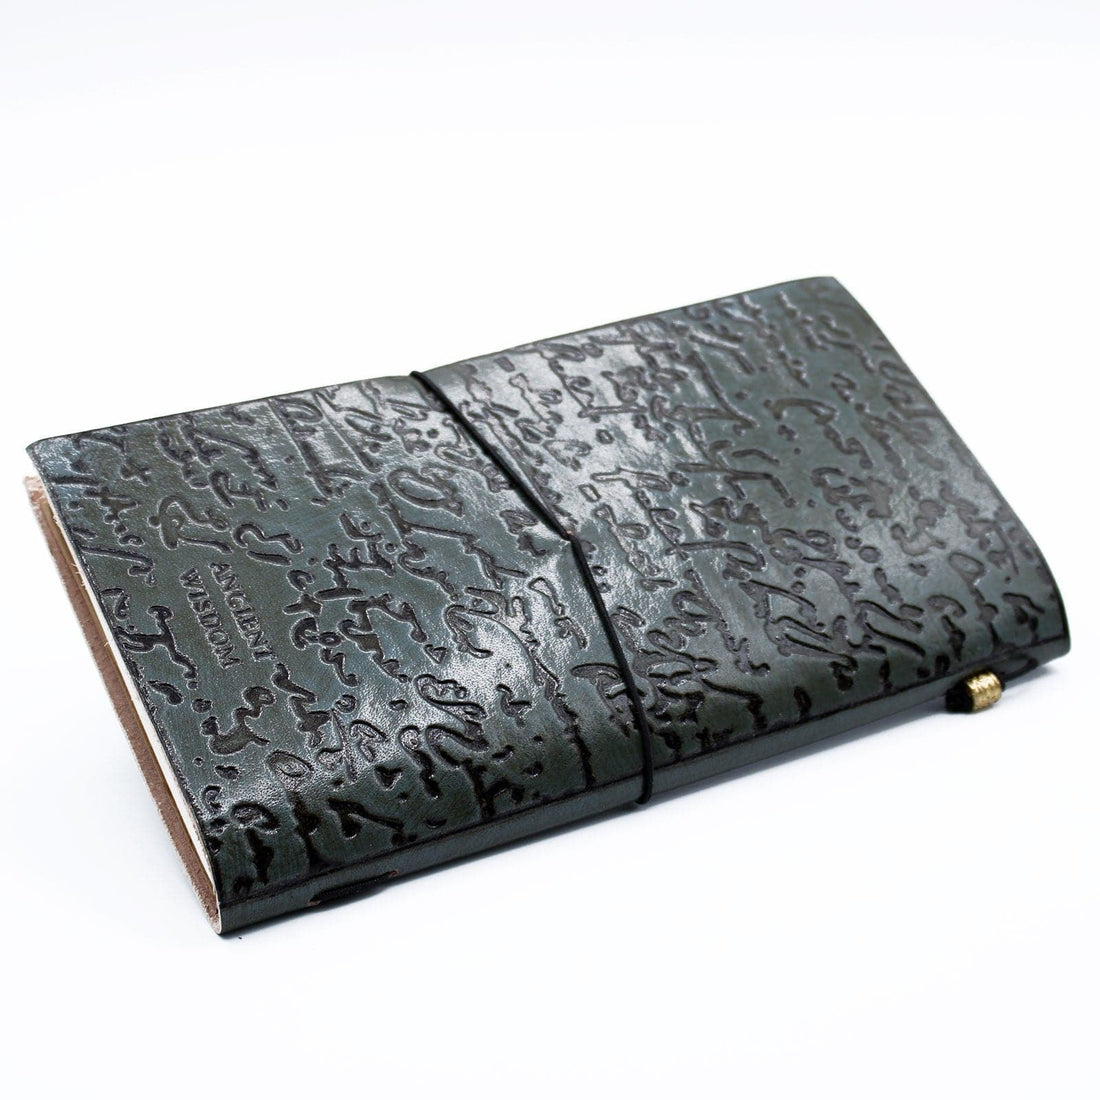 Handmade Leather Journal - Good Ideas and Other Dreams - Grey (80 pages) - best price from Maltashopper.com MSJ-03